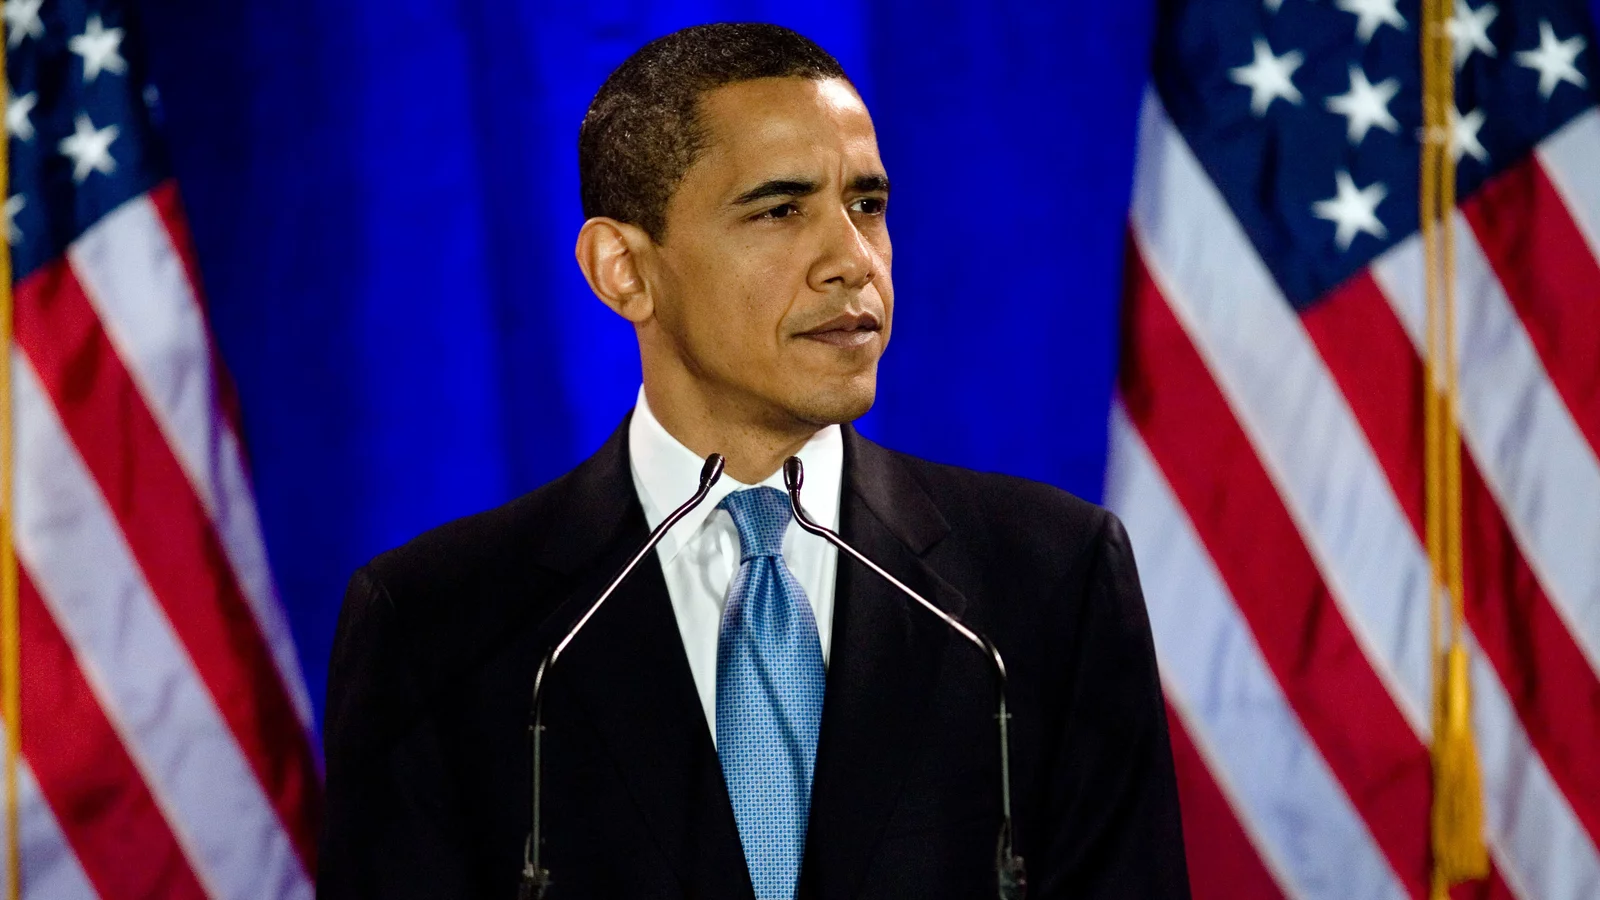 The Senator and presidential candidate Barack Obama delivers his speech 'A More Perfect Union'